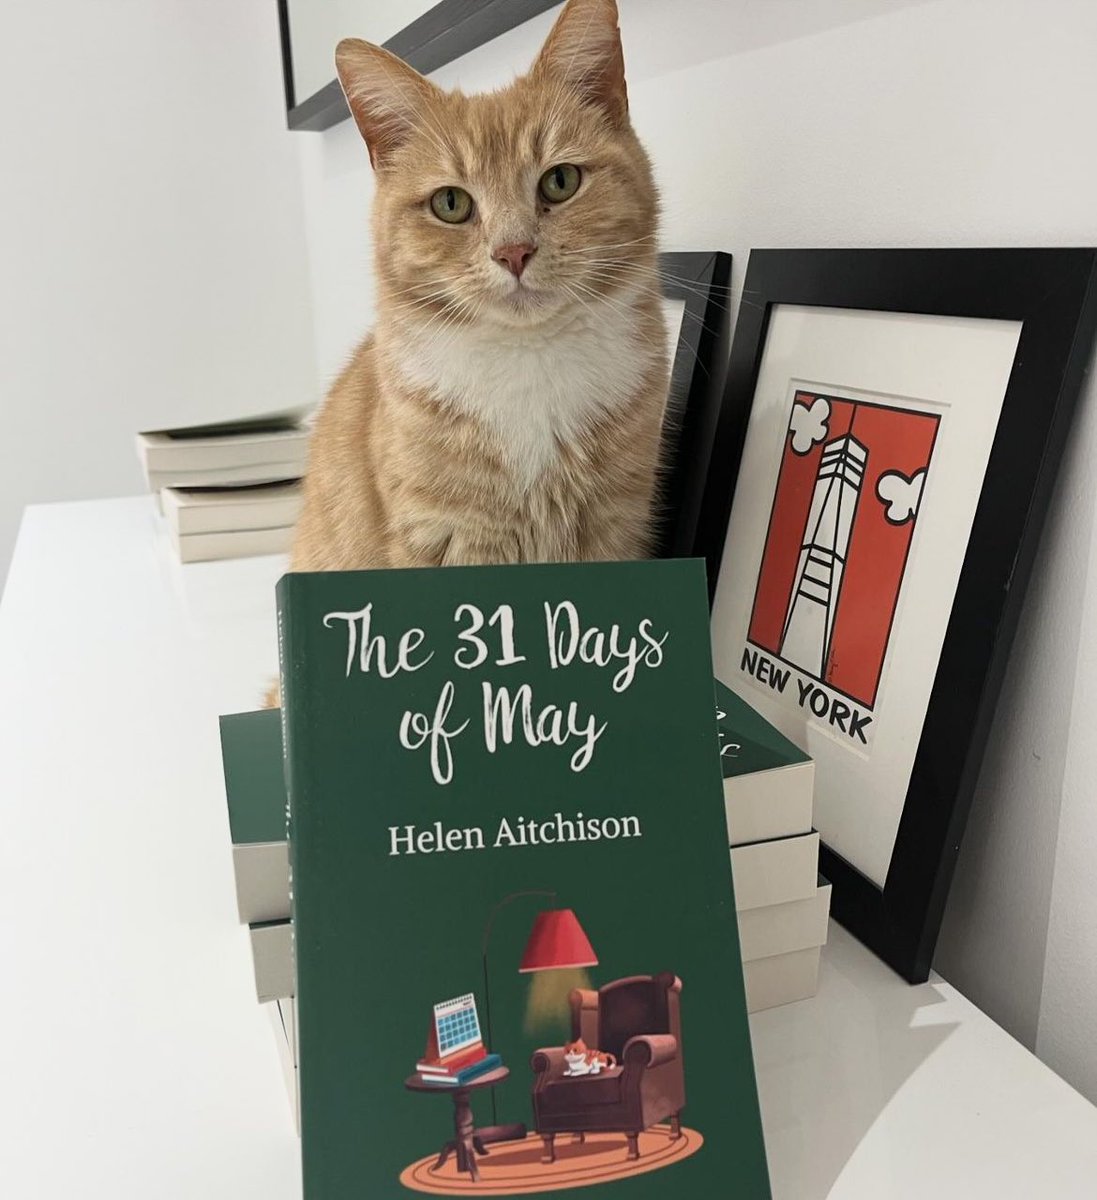 Happy Friday all, a special day here, Mammy’s new book is out today, extra special for me as I’m on the cover . Hope you all have a wonderful day 😻🧡 #CatsOfX #adoptdontshop #rescuecat #CatChatBookClub